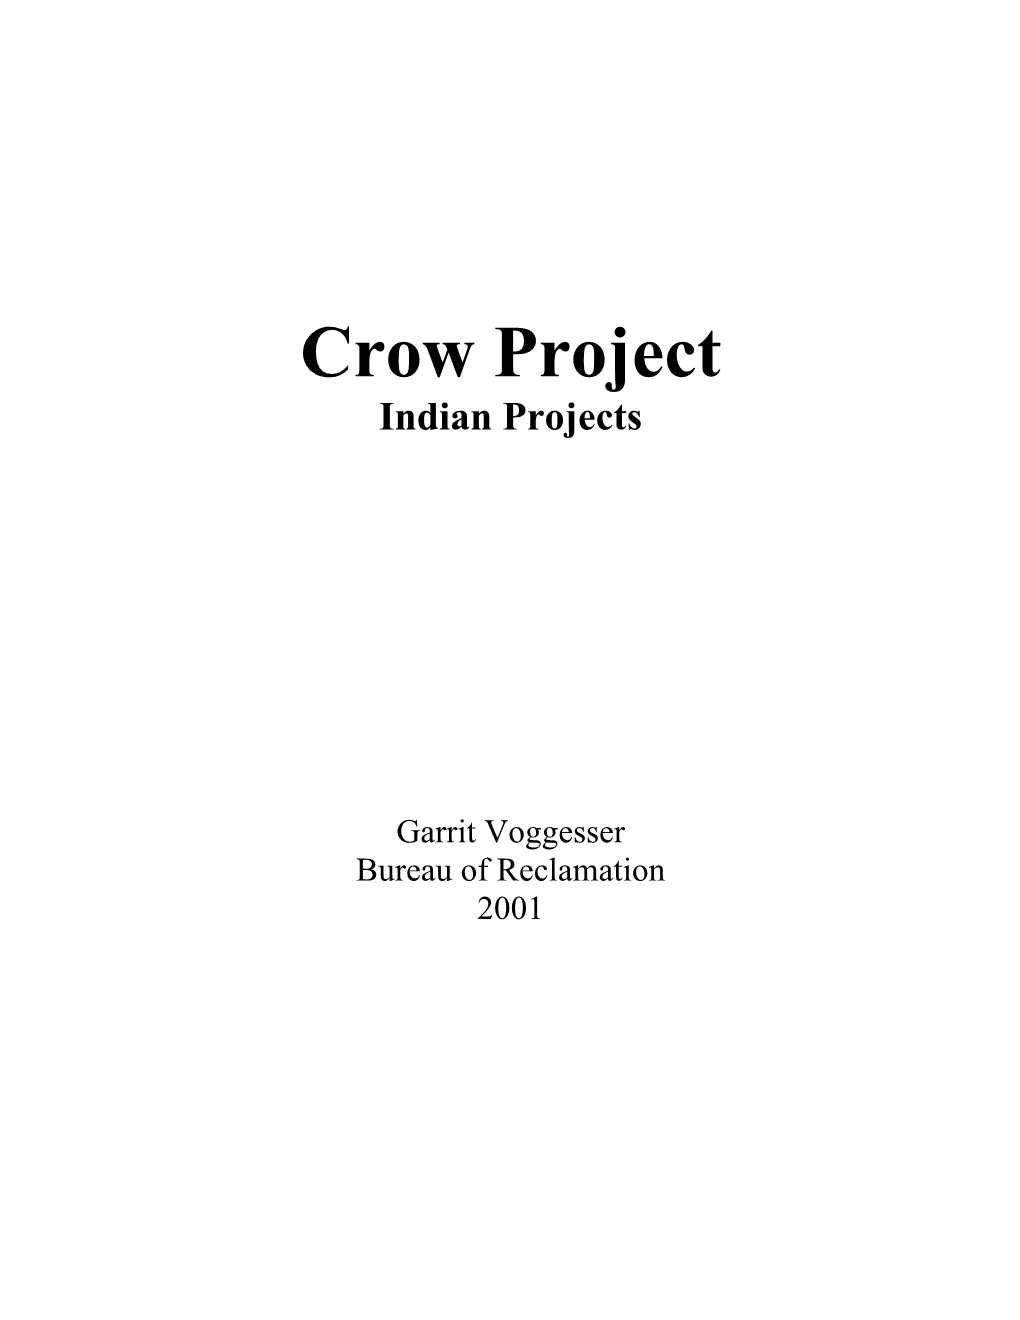 Crow Indian Irrigation Project, Montana